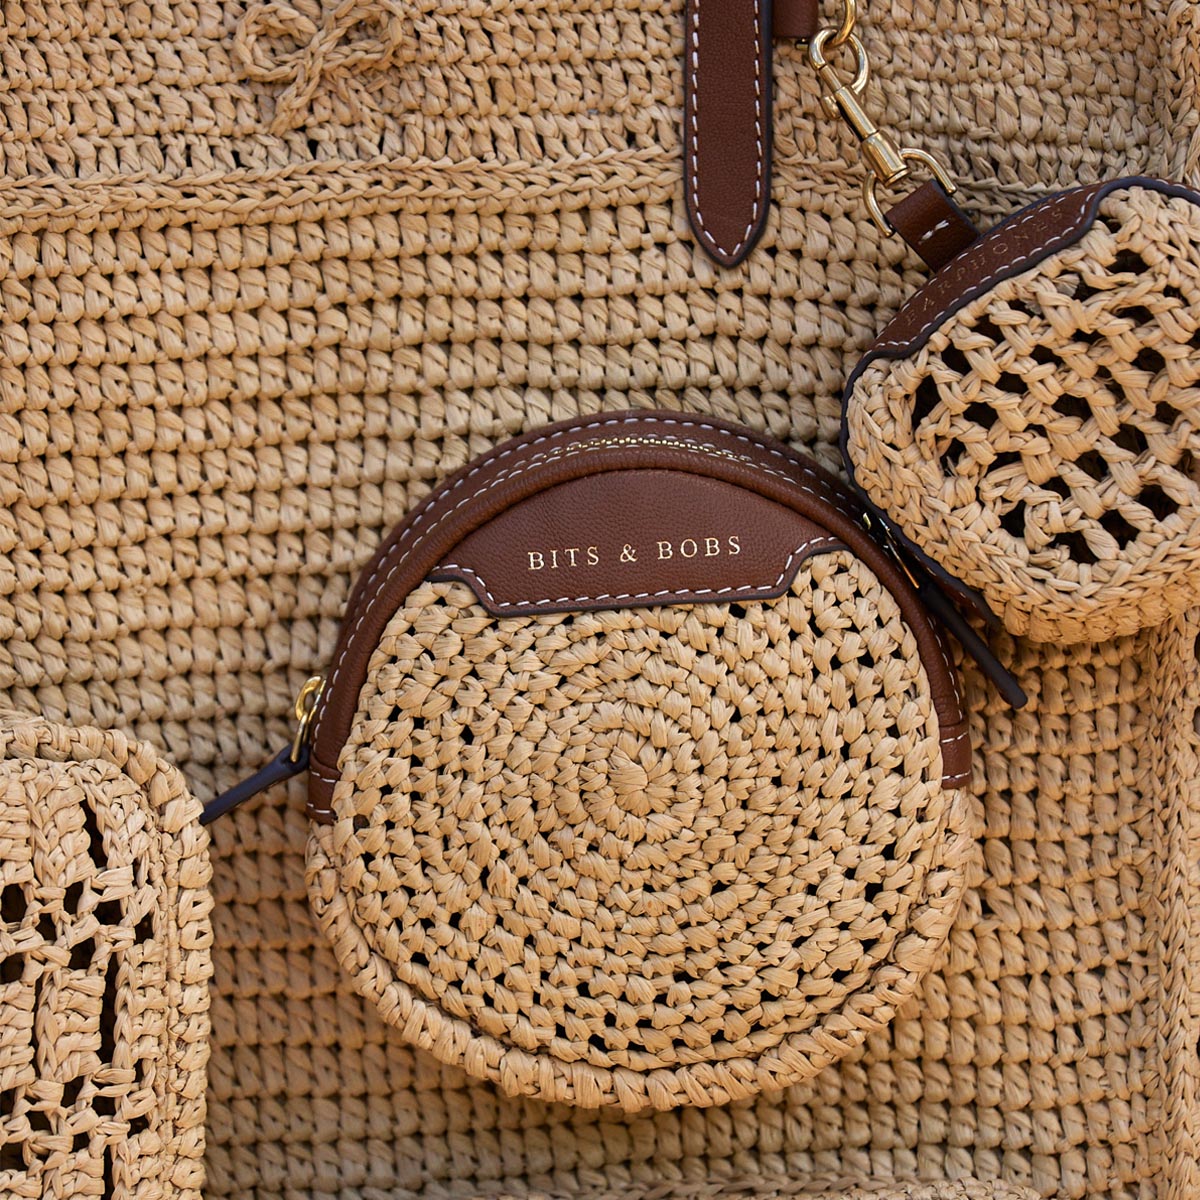 Holiday Tote in Natural Raffia